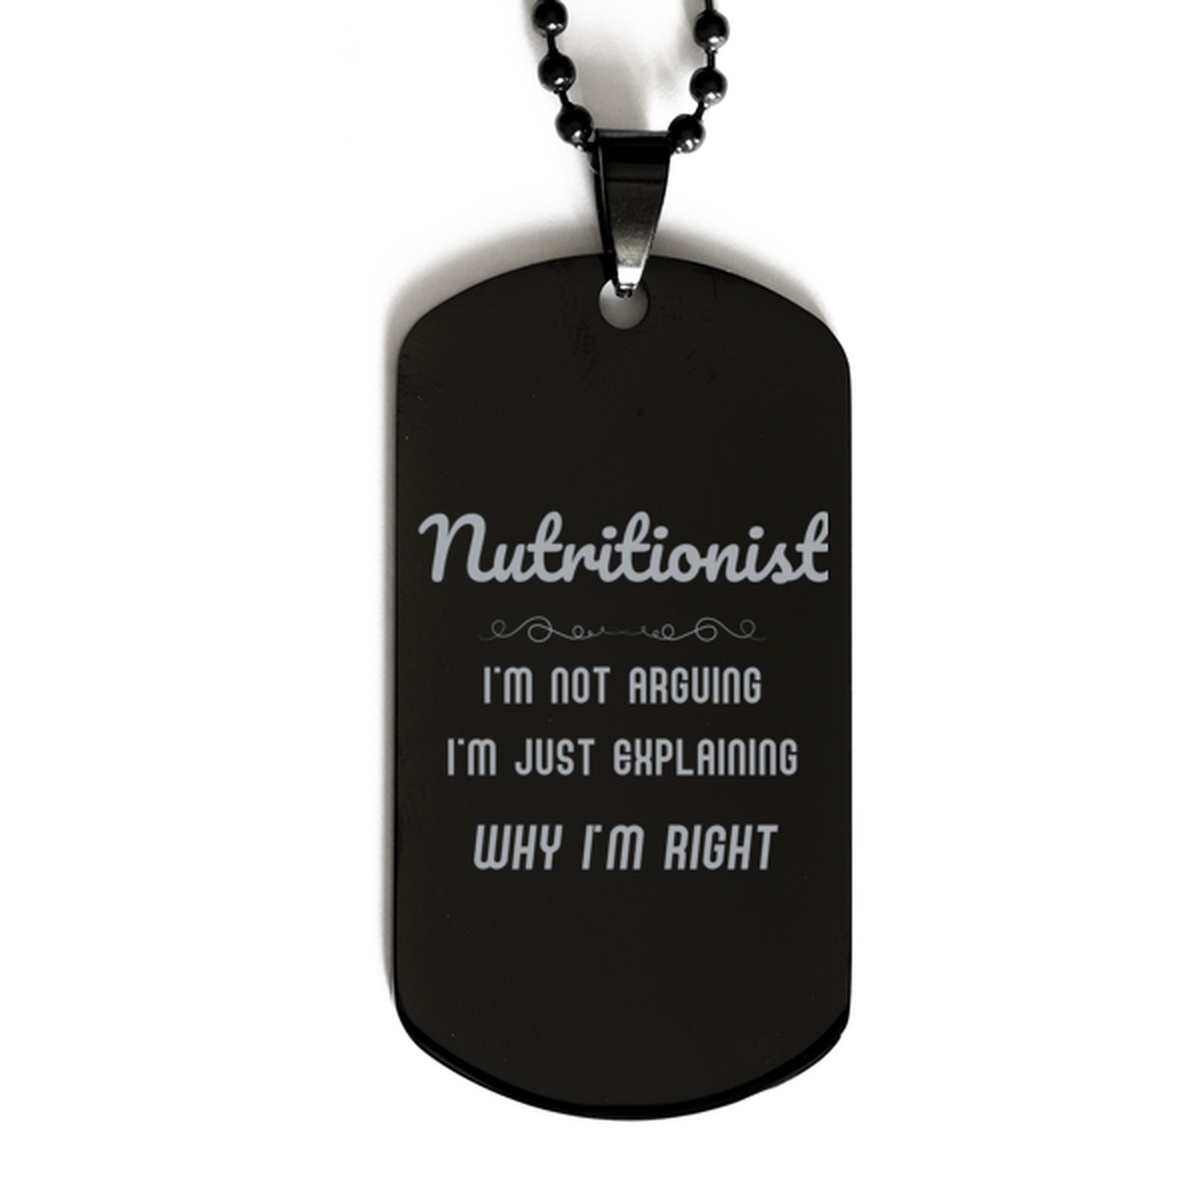 Nutritionist I'm not Arguing. I'm Just Explaining Why I'm RIGHT Black Dog Tag, Funny Saying Quote Nutritionist Gifts For Nutritionist Graduation Birthday Christmas Gifts for Men Women Coworker